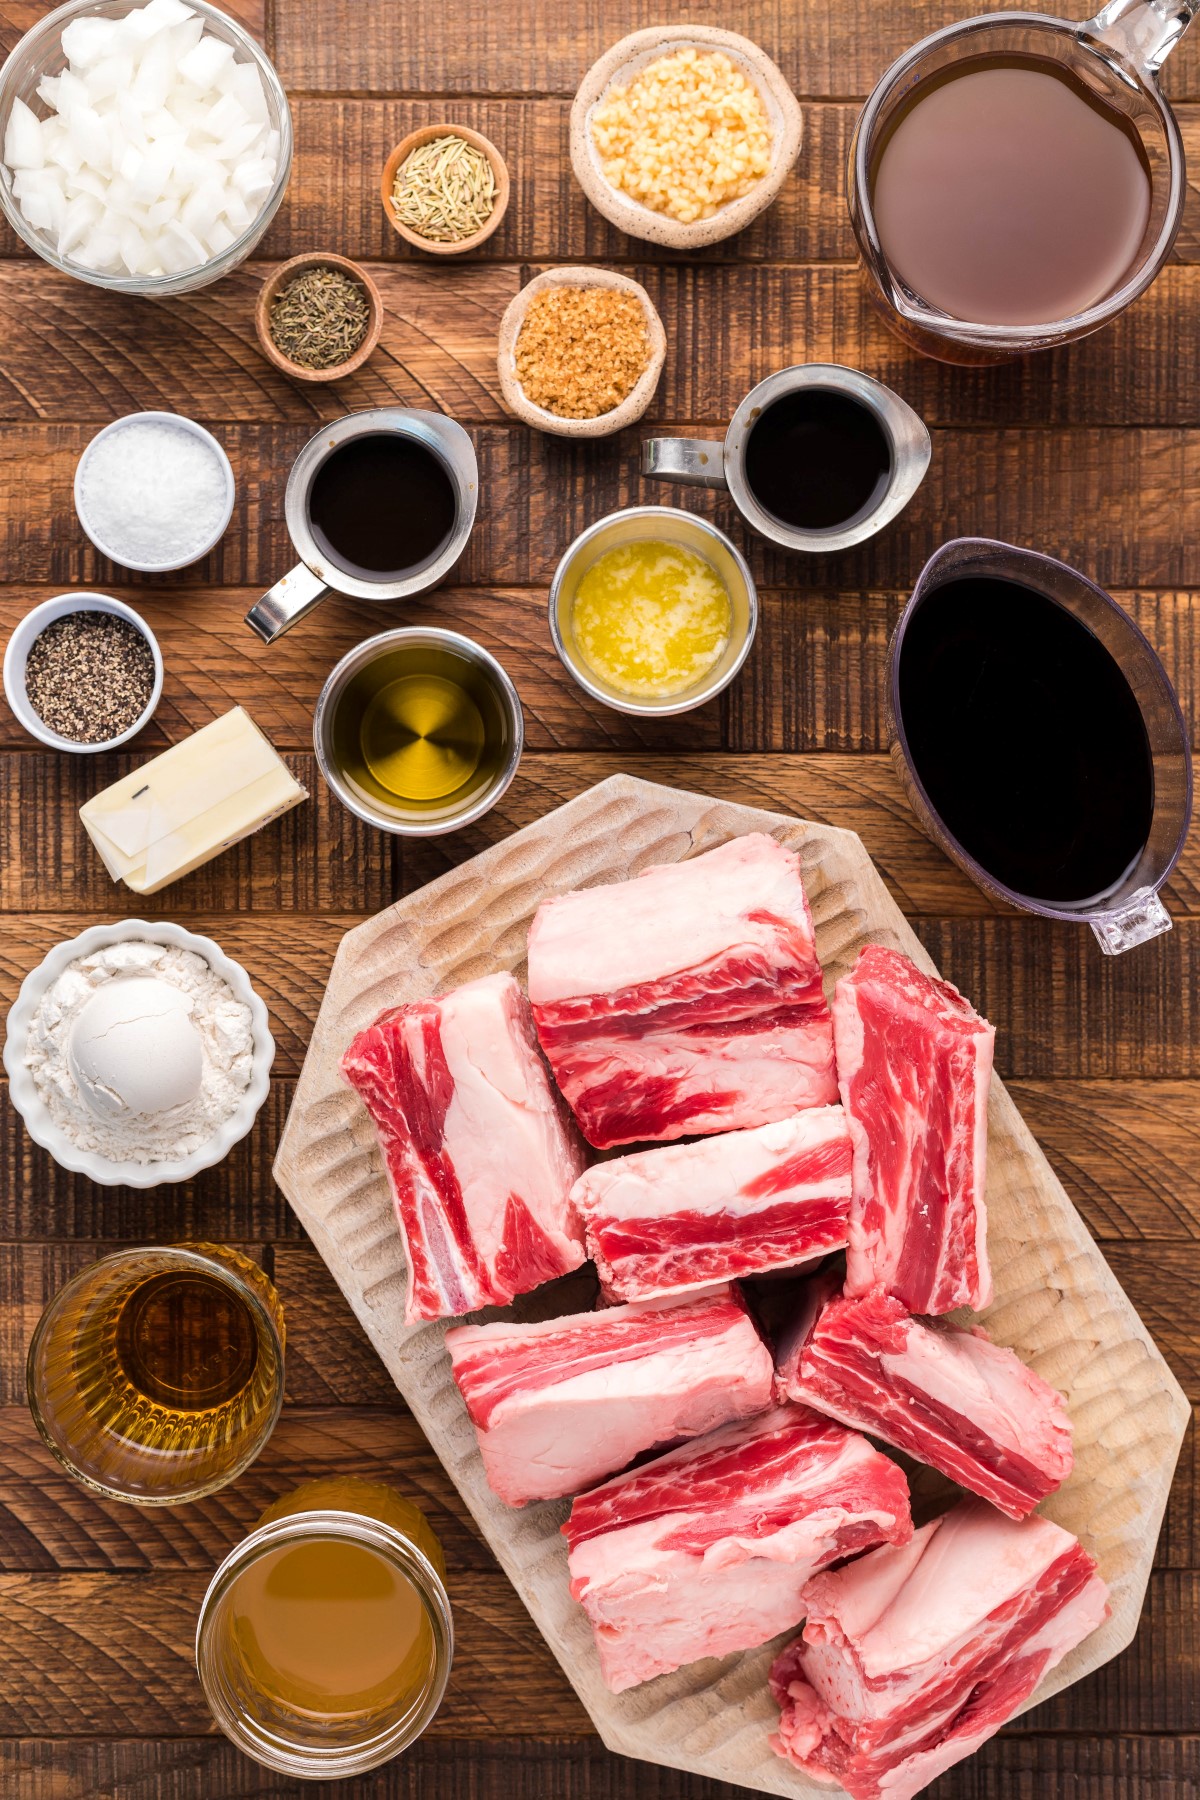 All the ingredients needed to make smoked beef short ribs laid out on a wooden board.